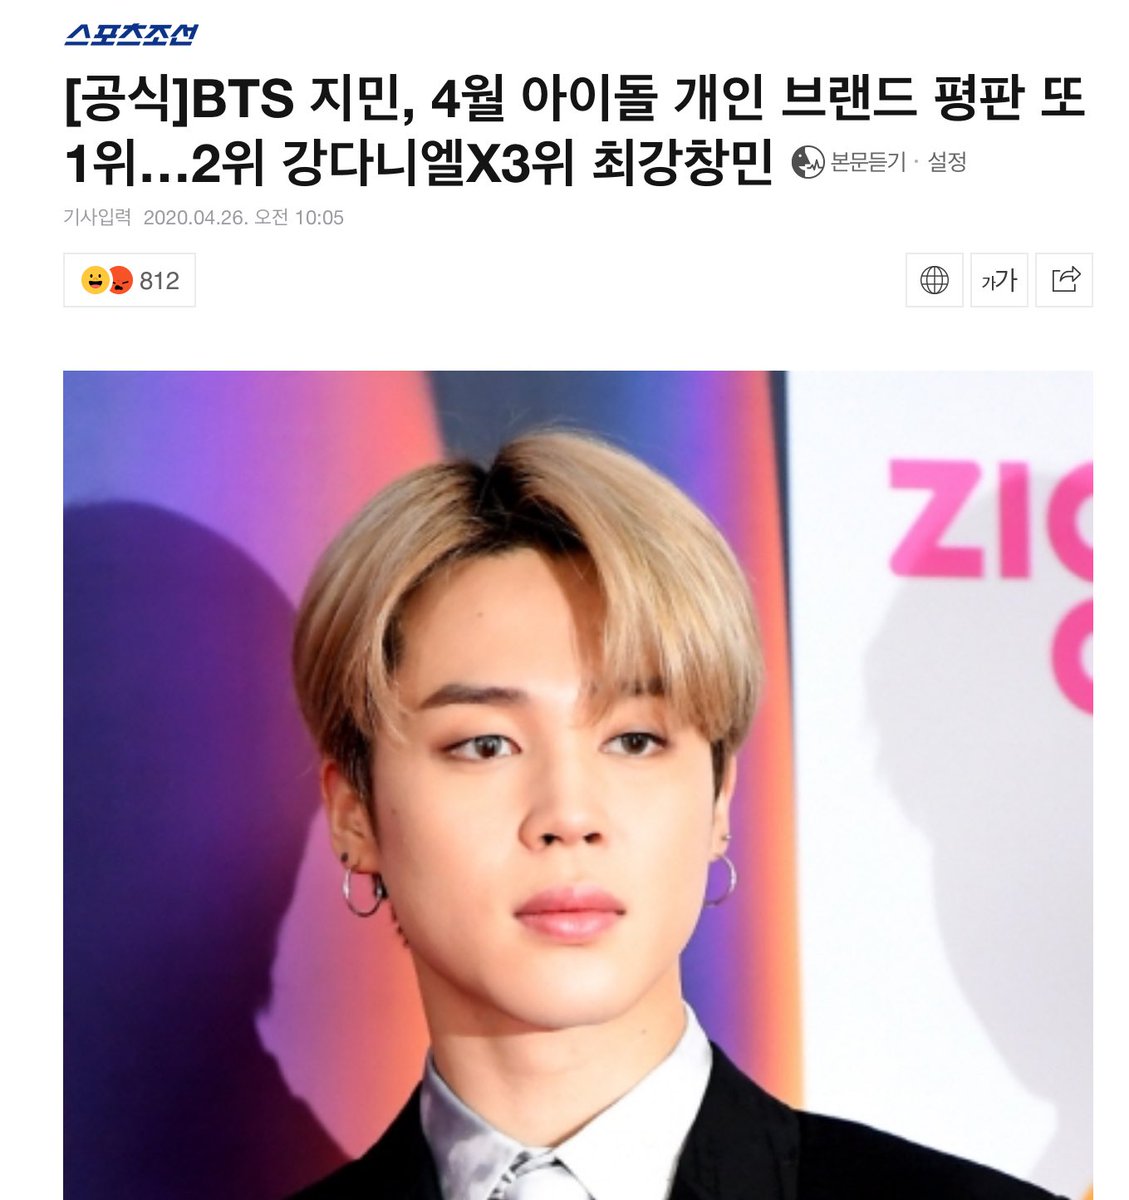 Kmedia has written several articles about Jimin topping Brand Reputation for Top 100 Idols in April 2020  http://naver.me/GBIXCxJn  http://naver.me/FKaEL8Pv  http://naver.me/59AayXBt  http://naver.me/5jWxl4QX Like & recommend